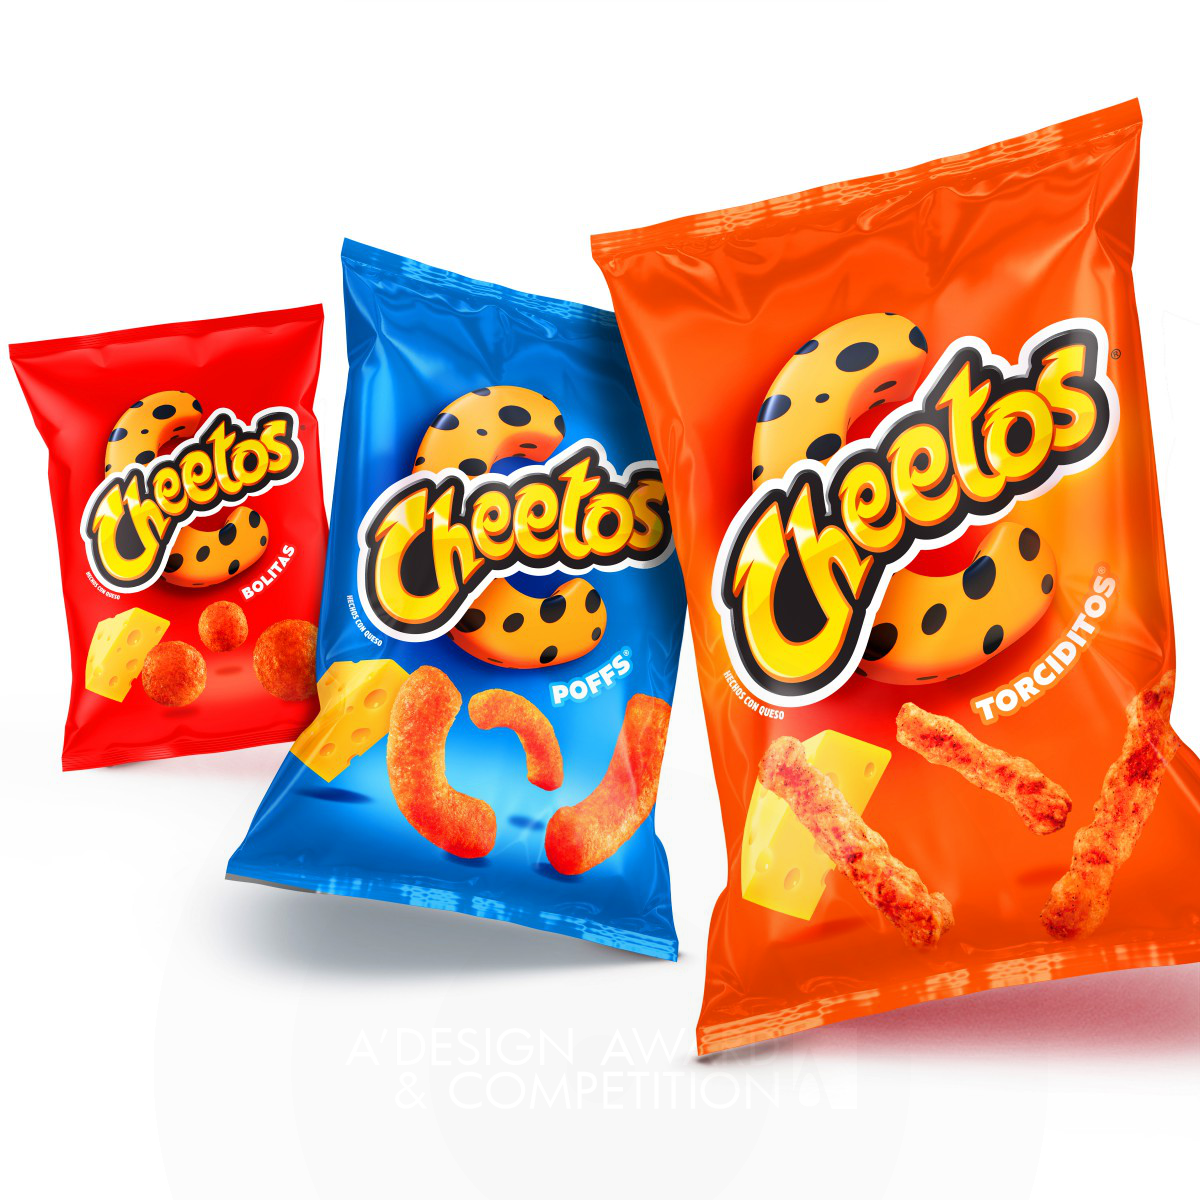 Dennis Furniss wins Silver at the prestigious A' Packaging Design Award with Cheetos Redesign Packaging.